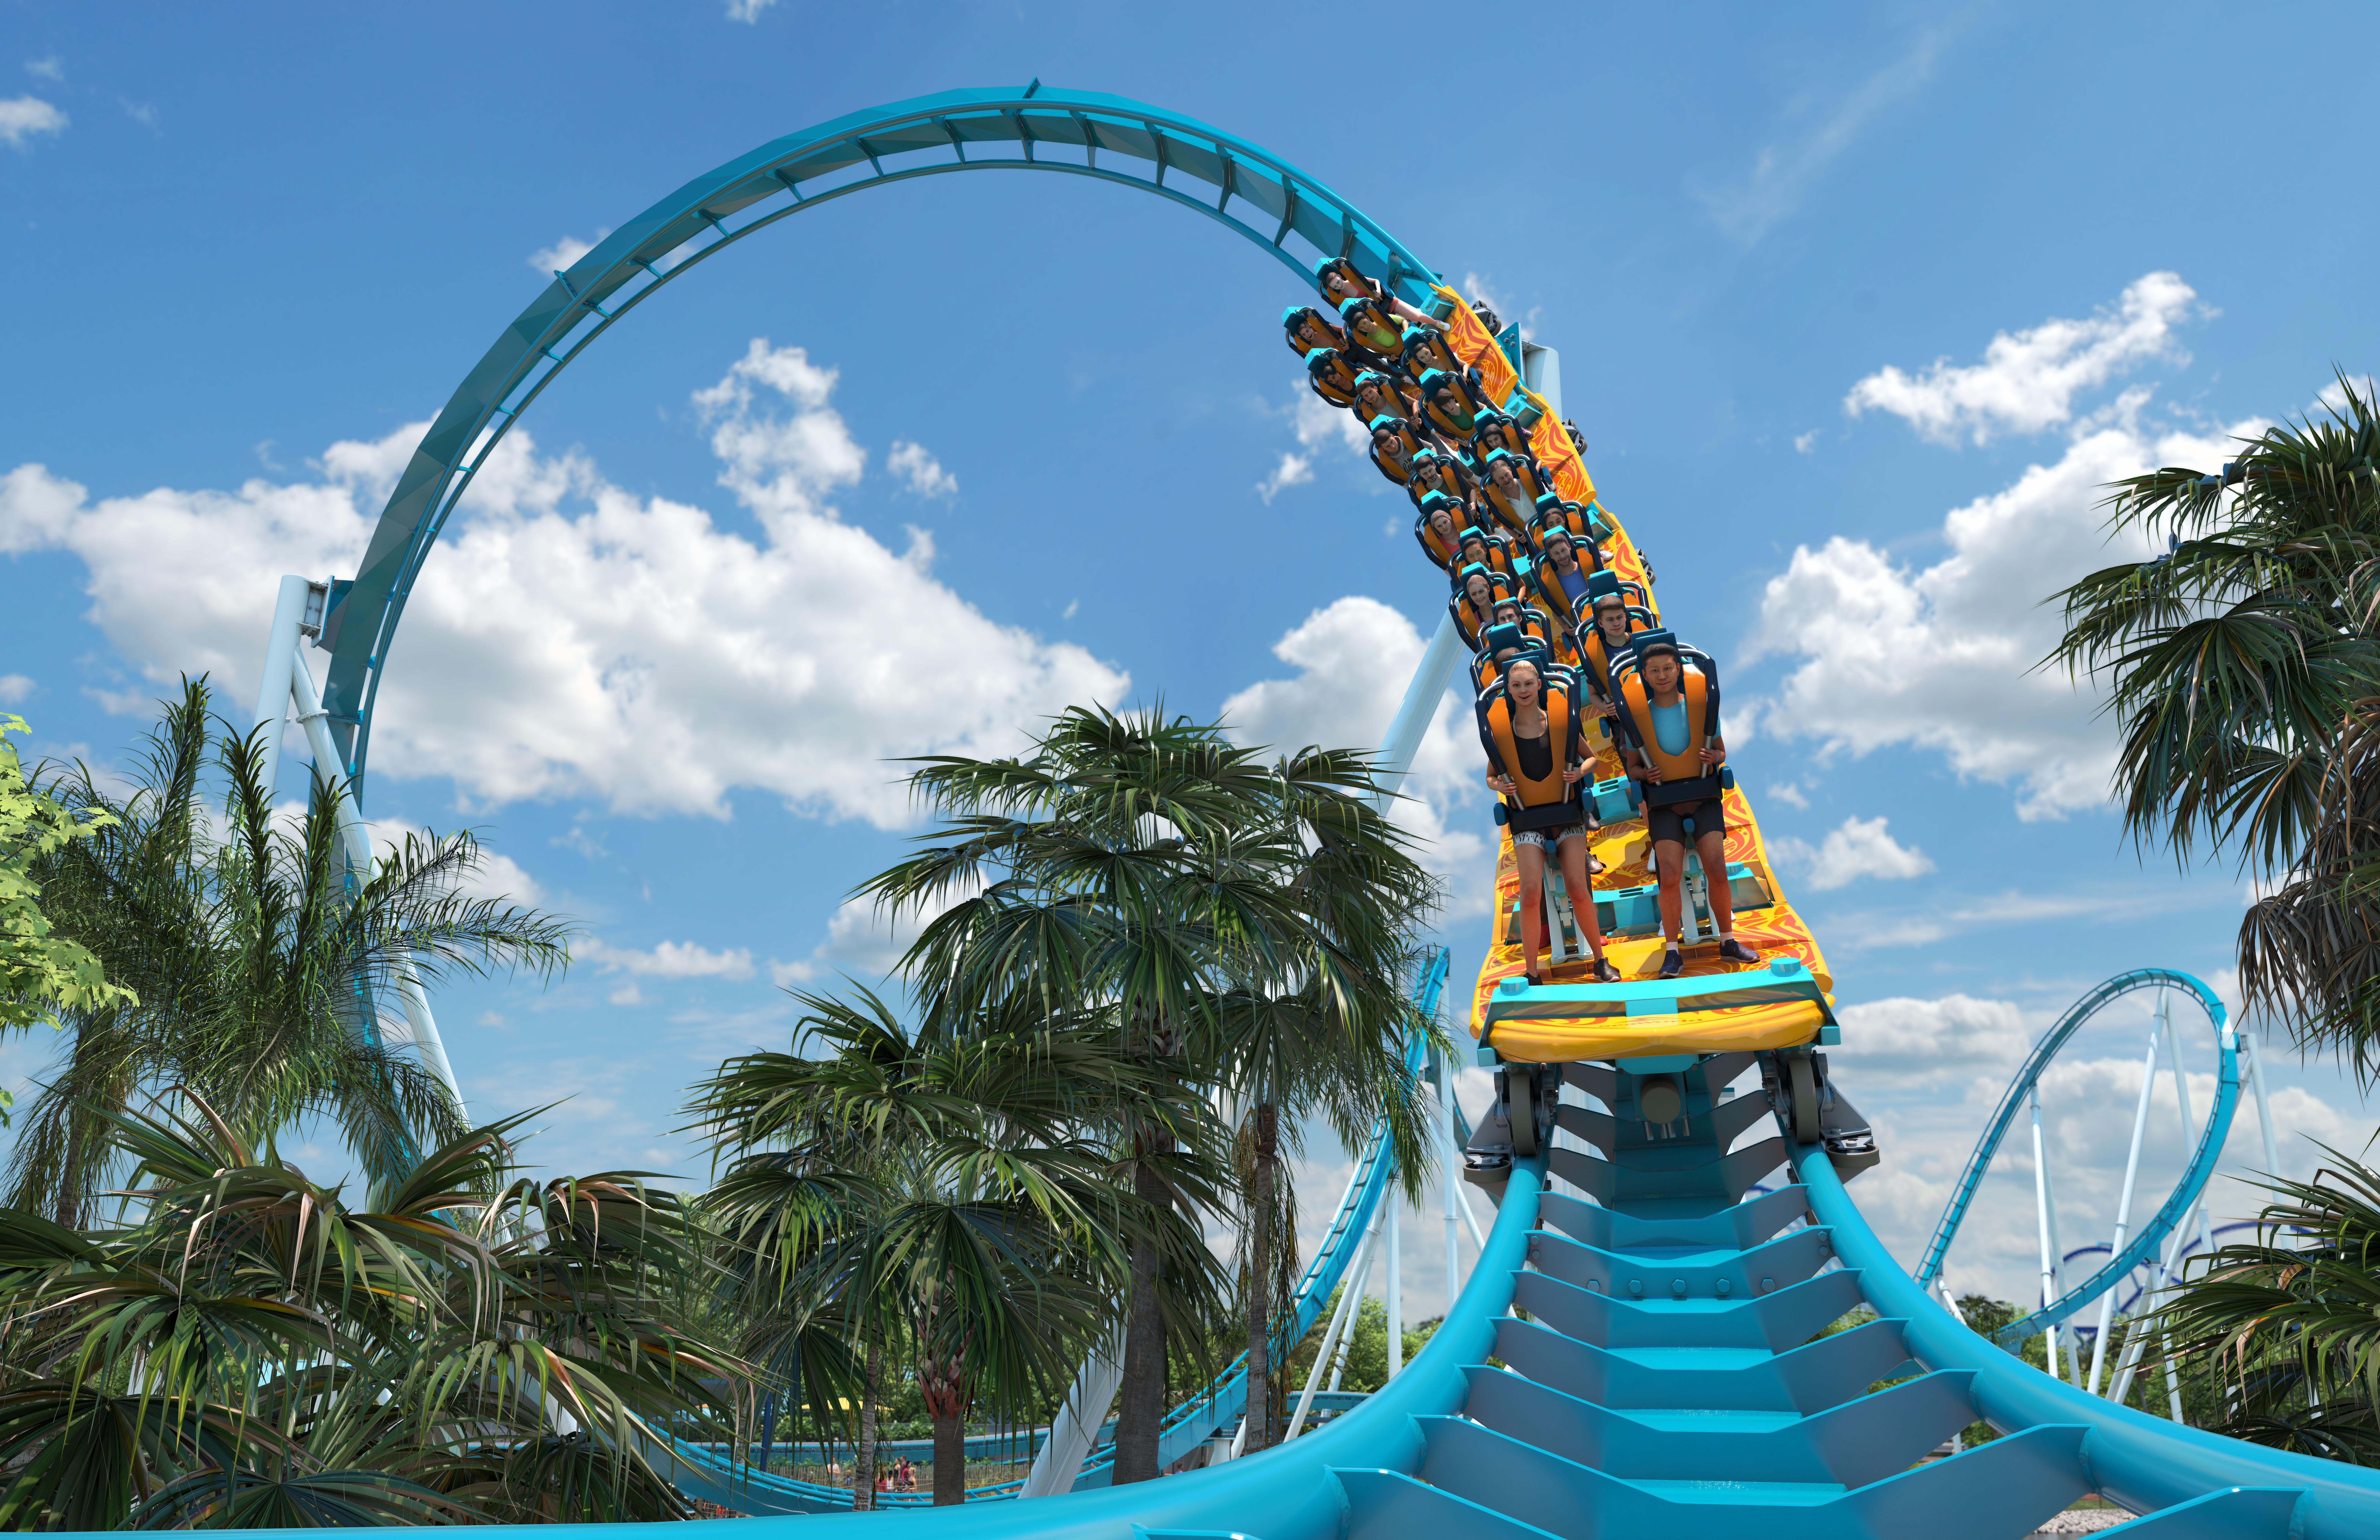 Pipeline: The Surf Coaster - Now Open